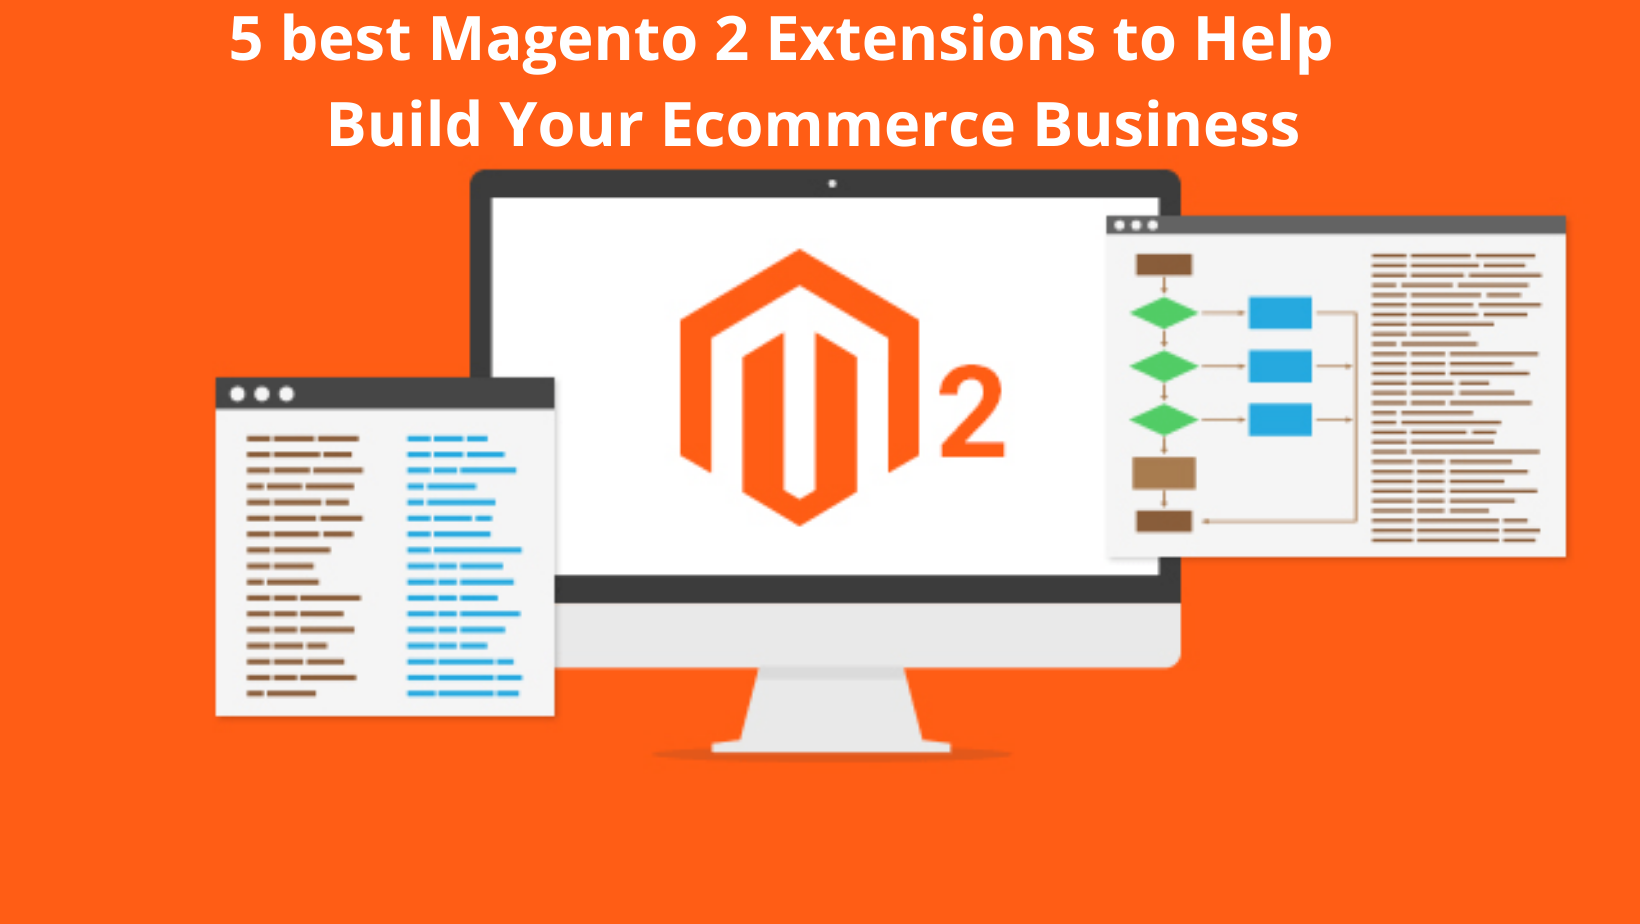 5 BEST MAGENTO 2 EXTENSIONS TO HELP YOU BUILD YOUR ECOMMERCE BUSINESS